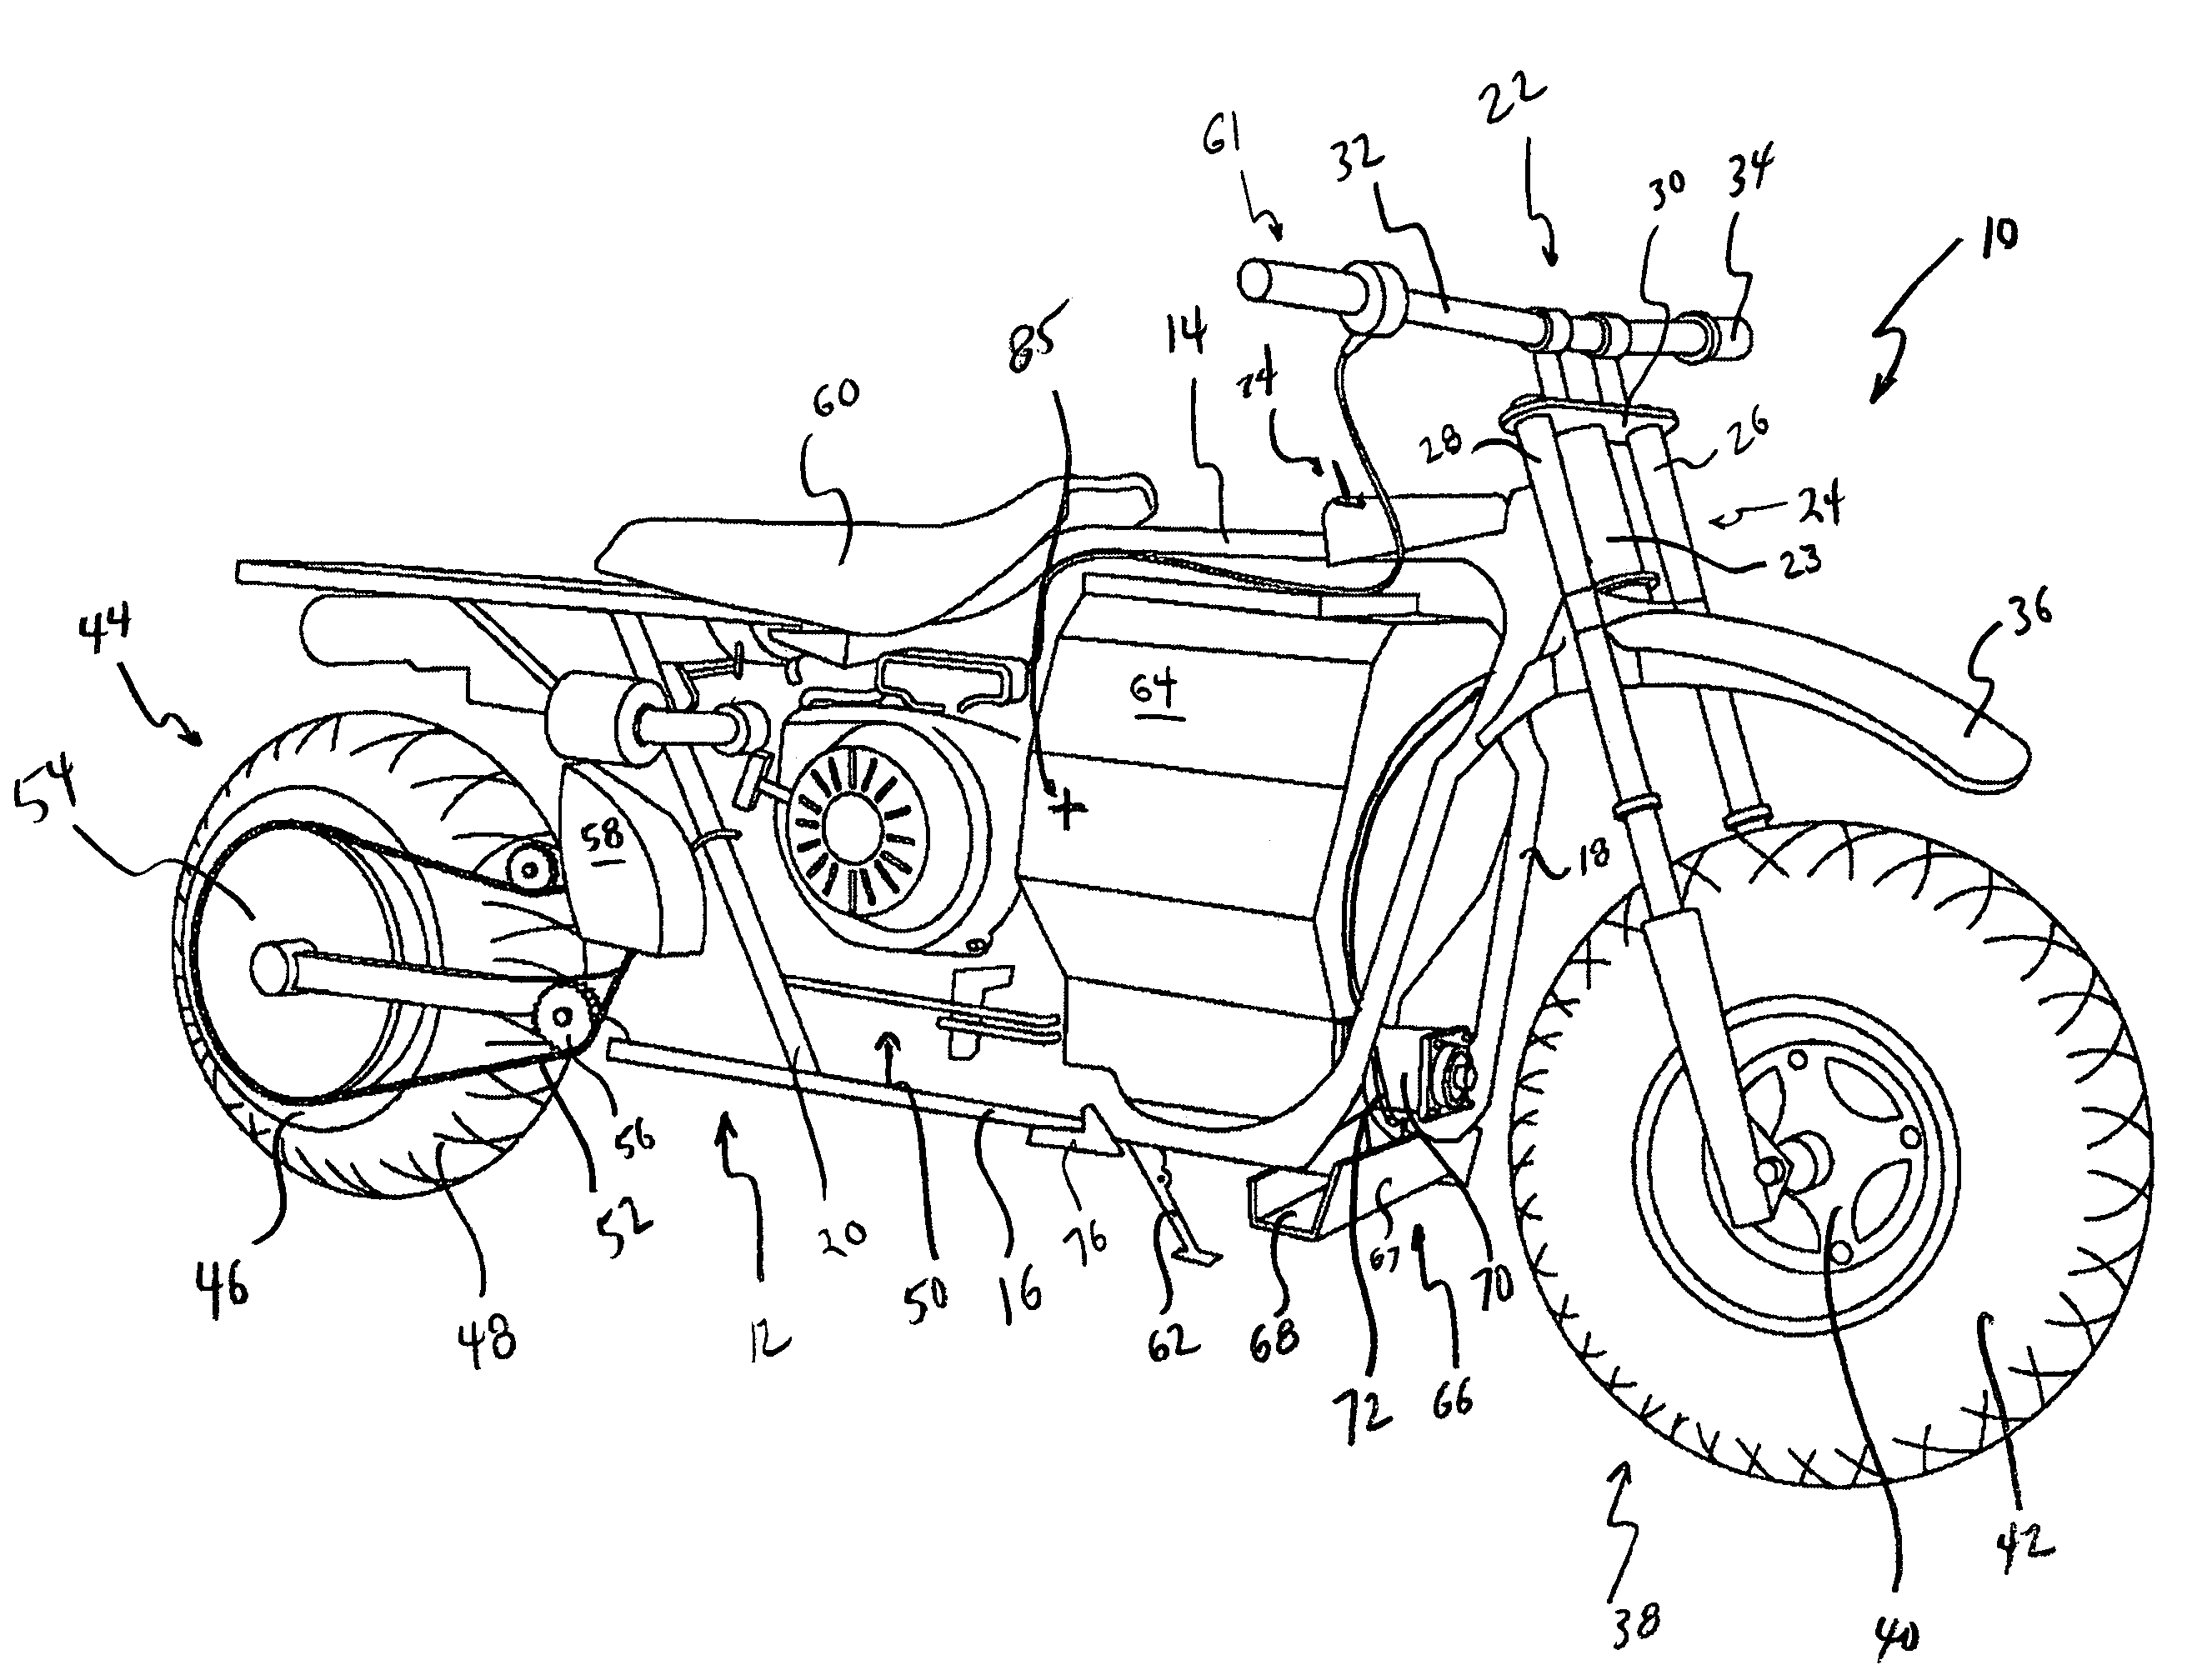 Self-propelled chemical delivery vehicle and dispenser